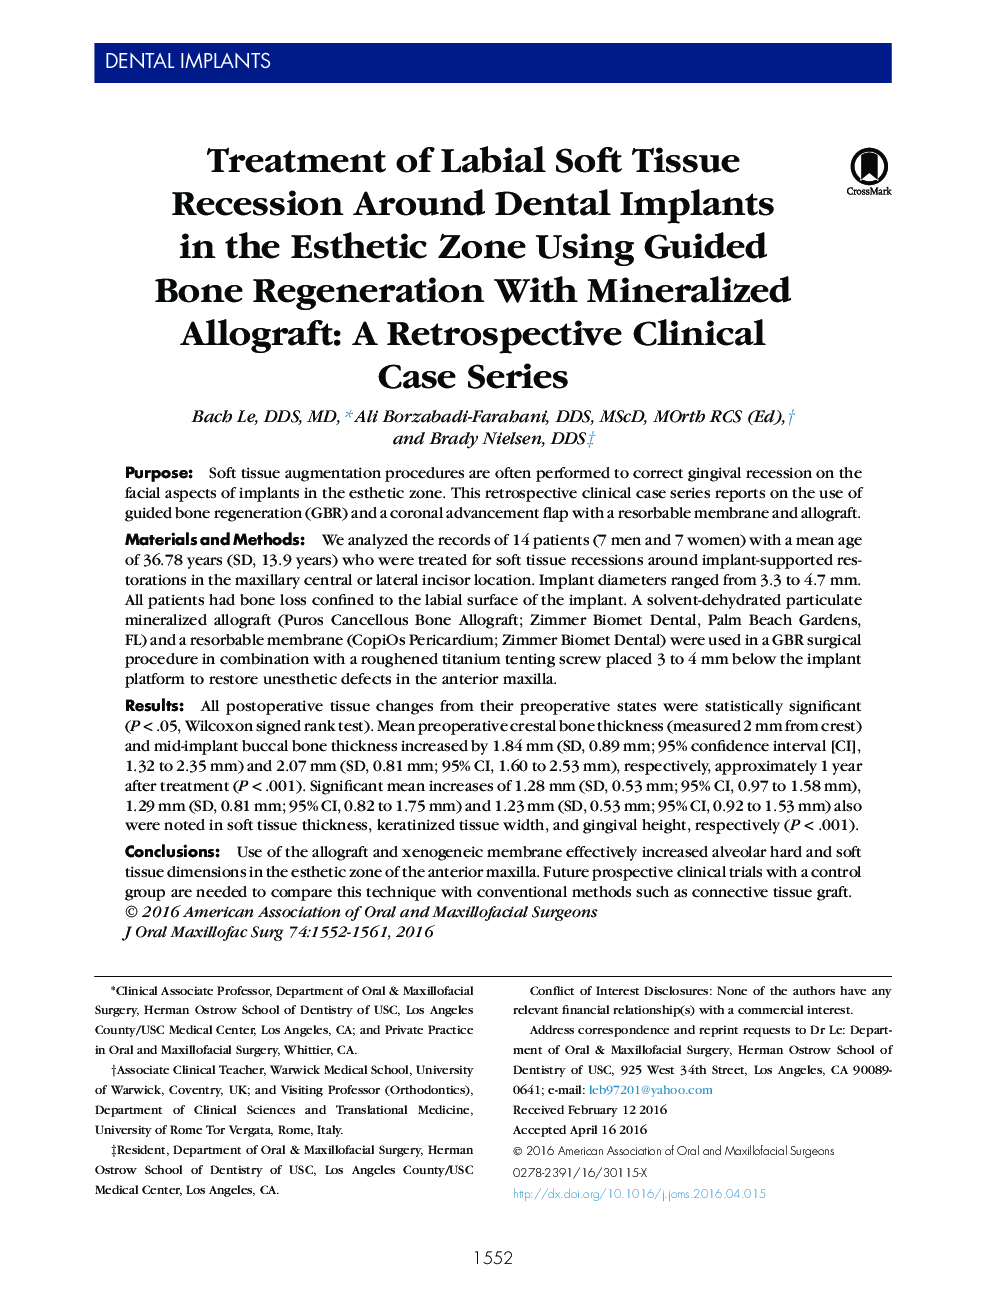 Treatment of Labial Soft Tissue Recession Around Dental Implants in the Esthetic Zone Using Guided Bone Regeneration With Mineralized Allograft: A Retrospective Clinical Case Series 